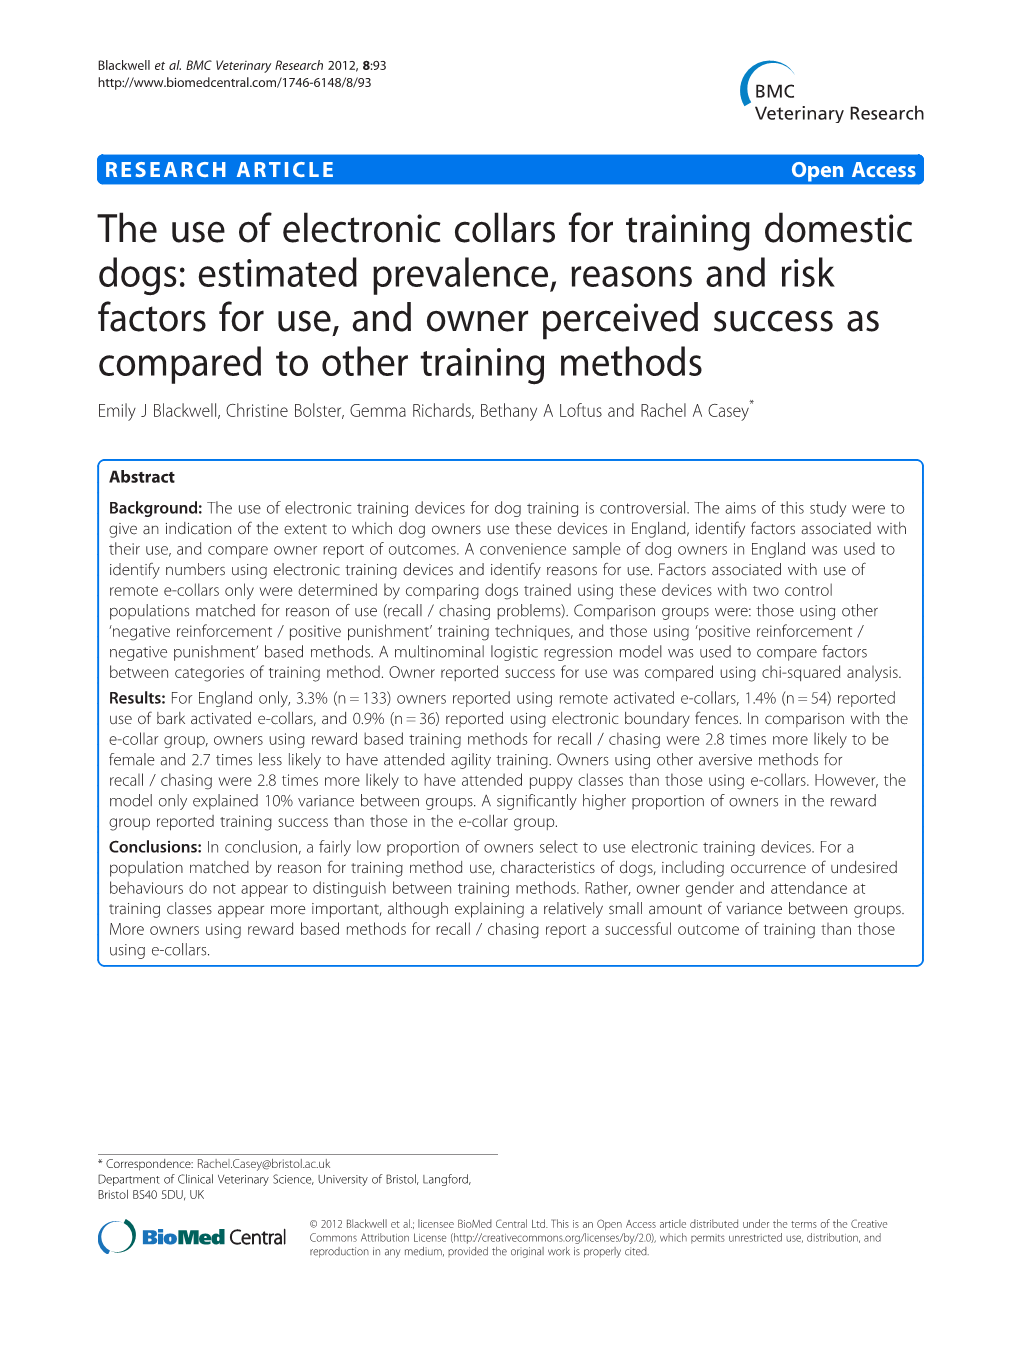 The Use of Electronic Collars for Training